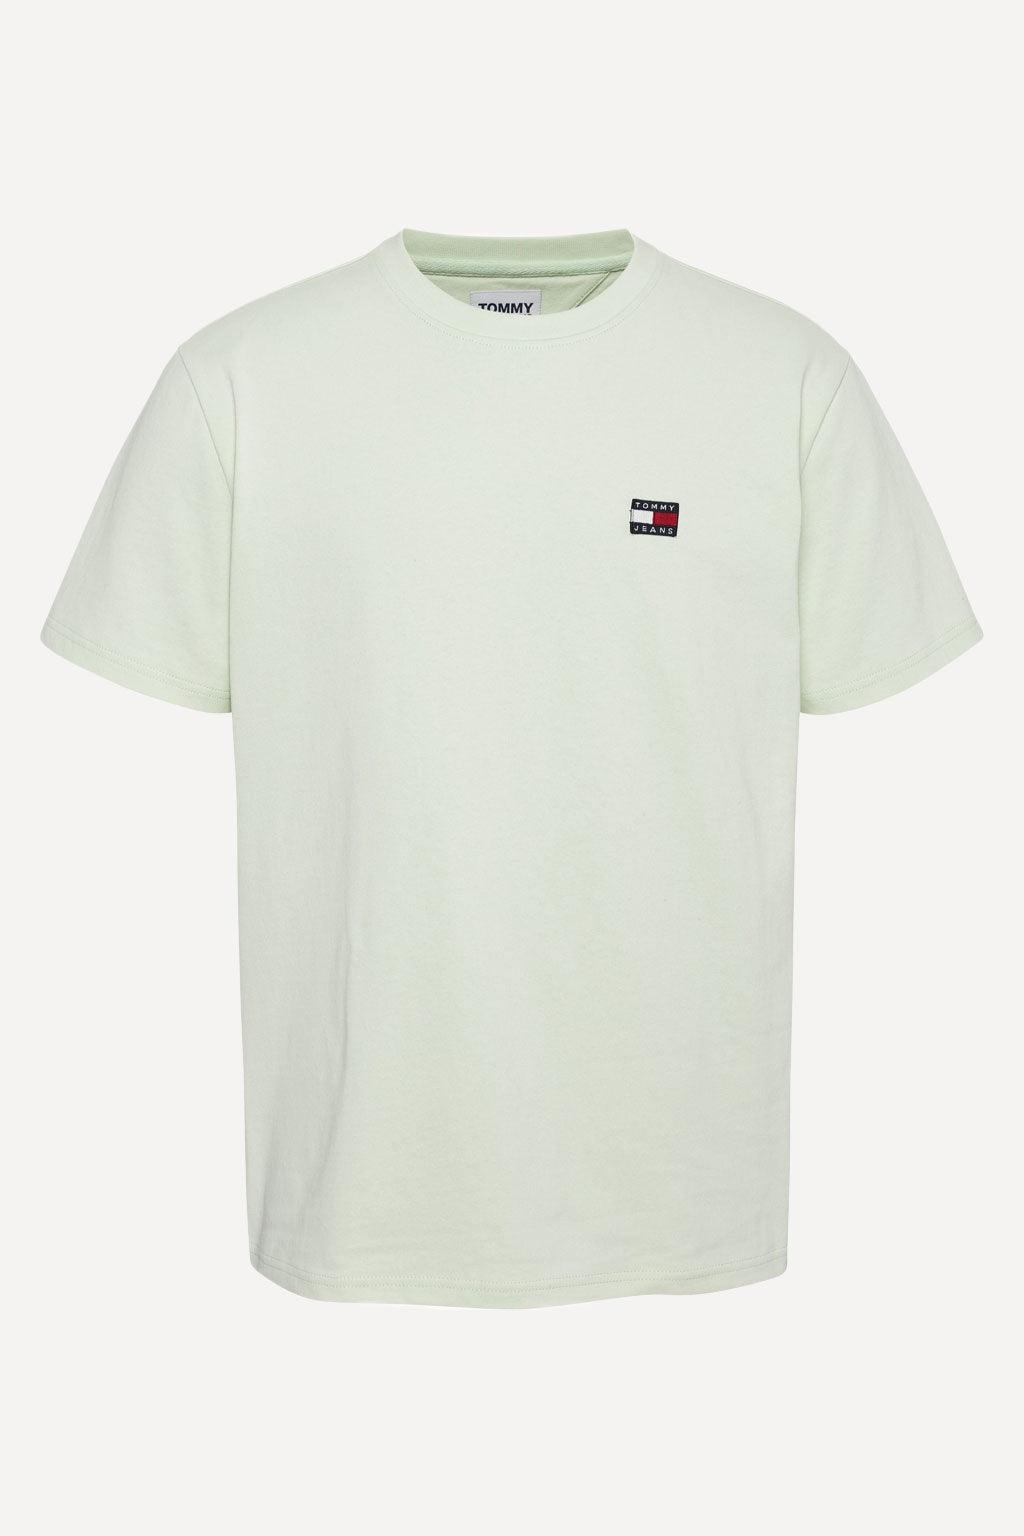 Tommy Jeans t-shirt - Big Boss | the menswear concept